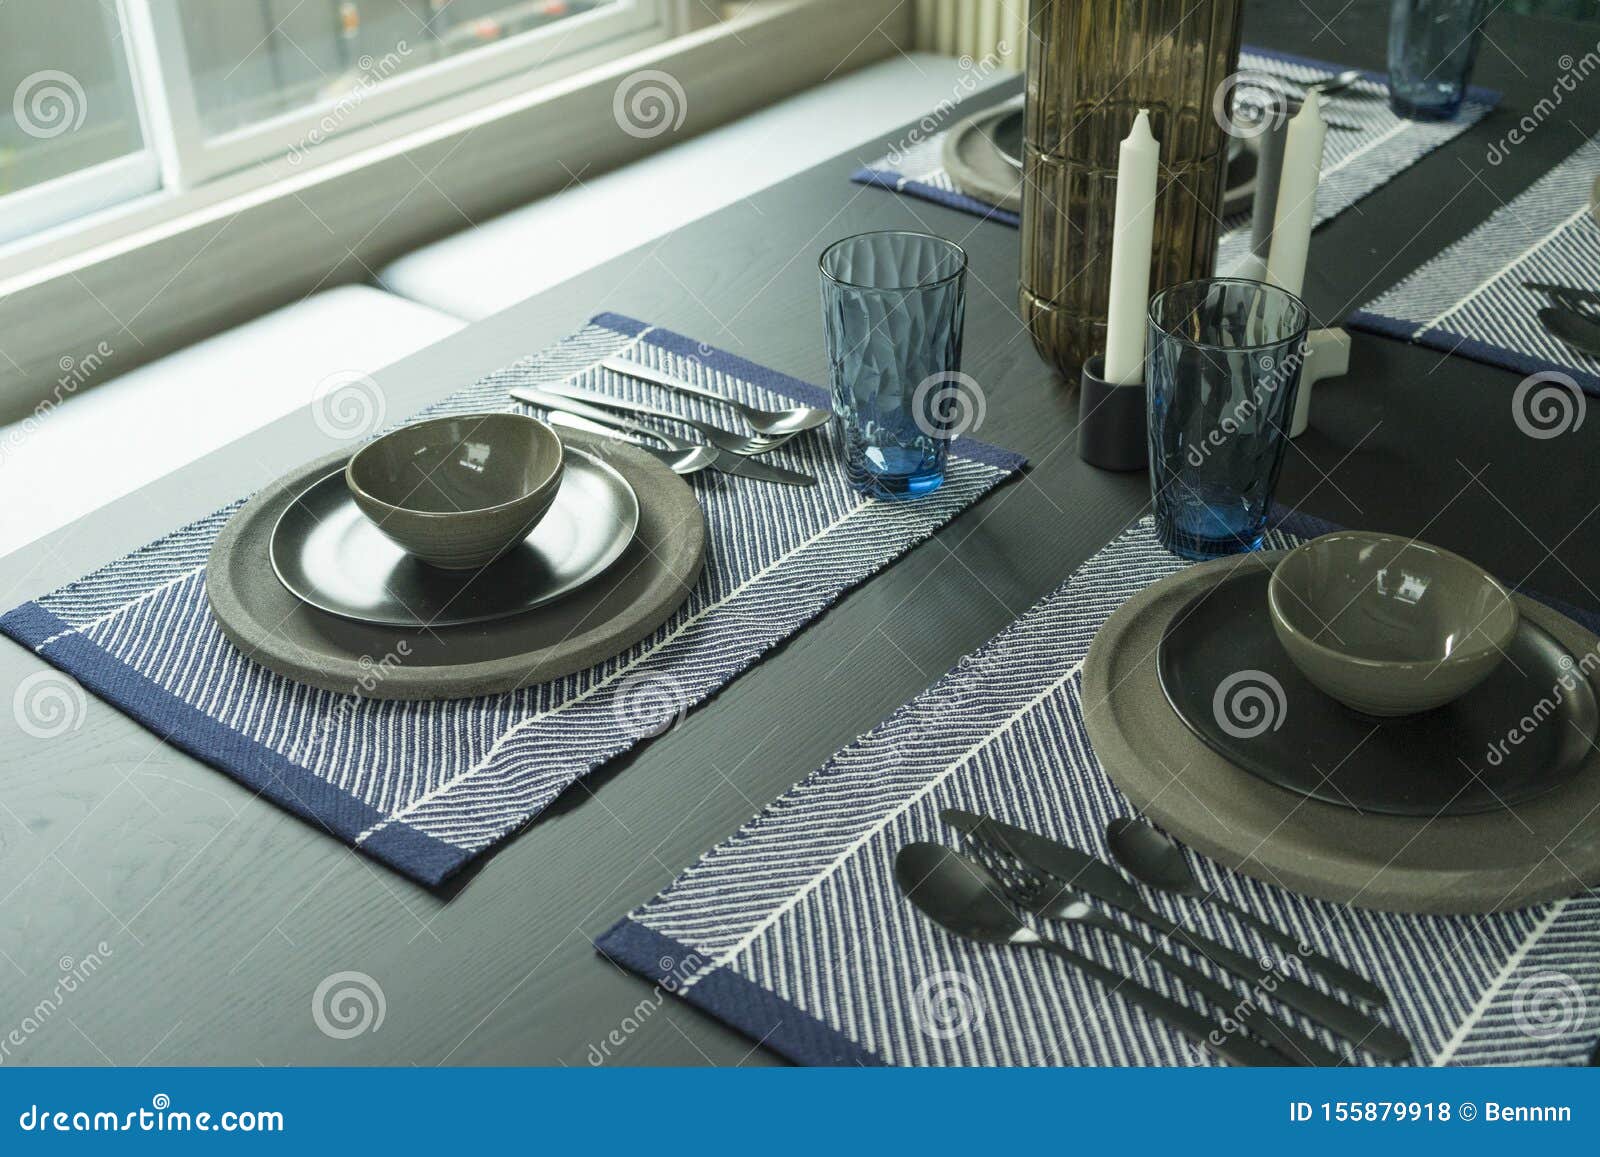 Modern Style of Plate Setting on Dining Table Stock Photo - Image of ...